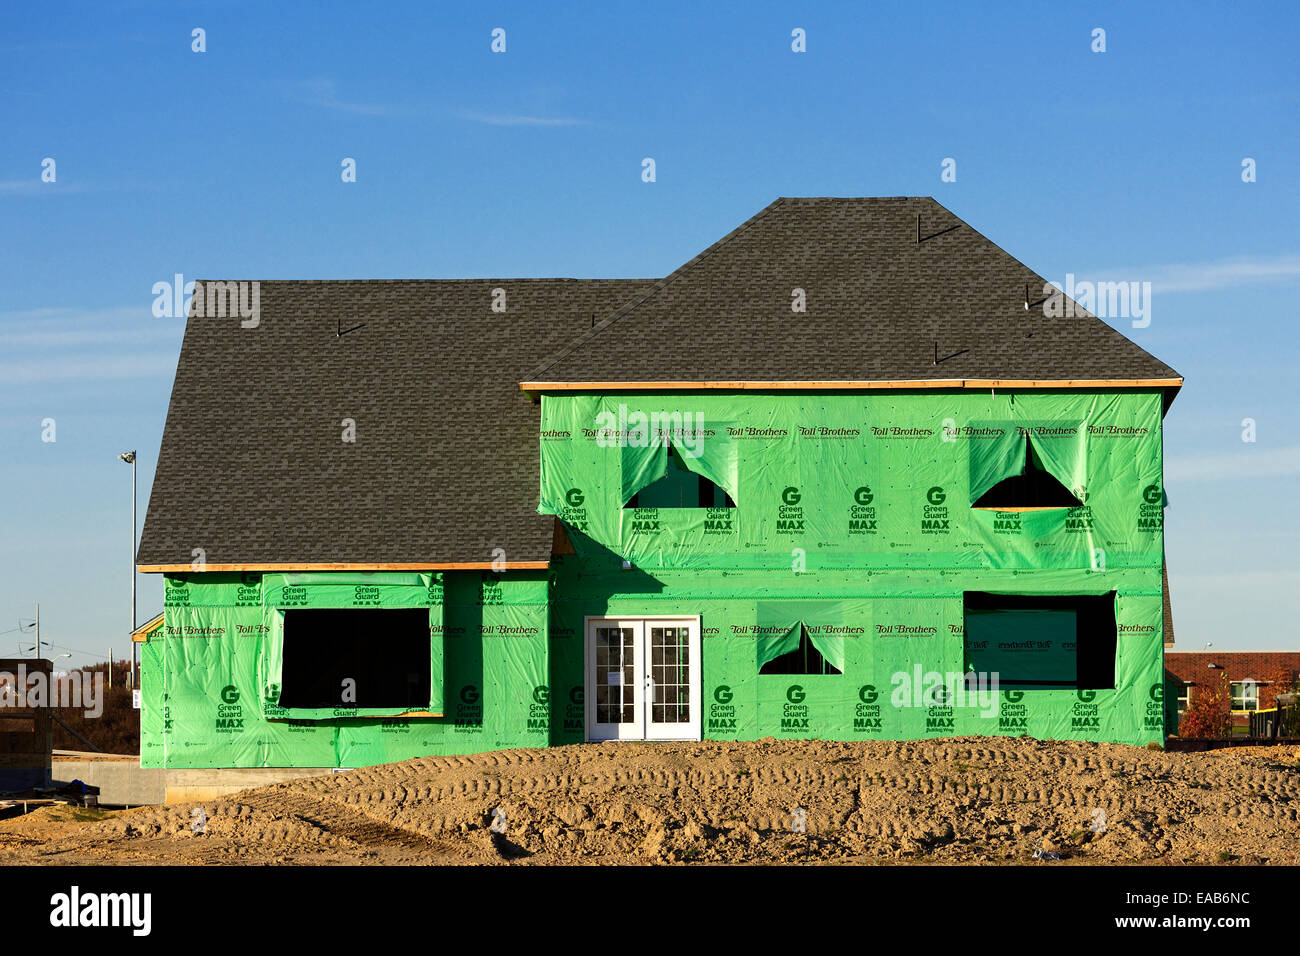 New home construction site, New Jersey, USA Banque D'Images